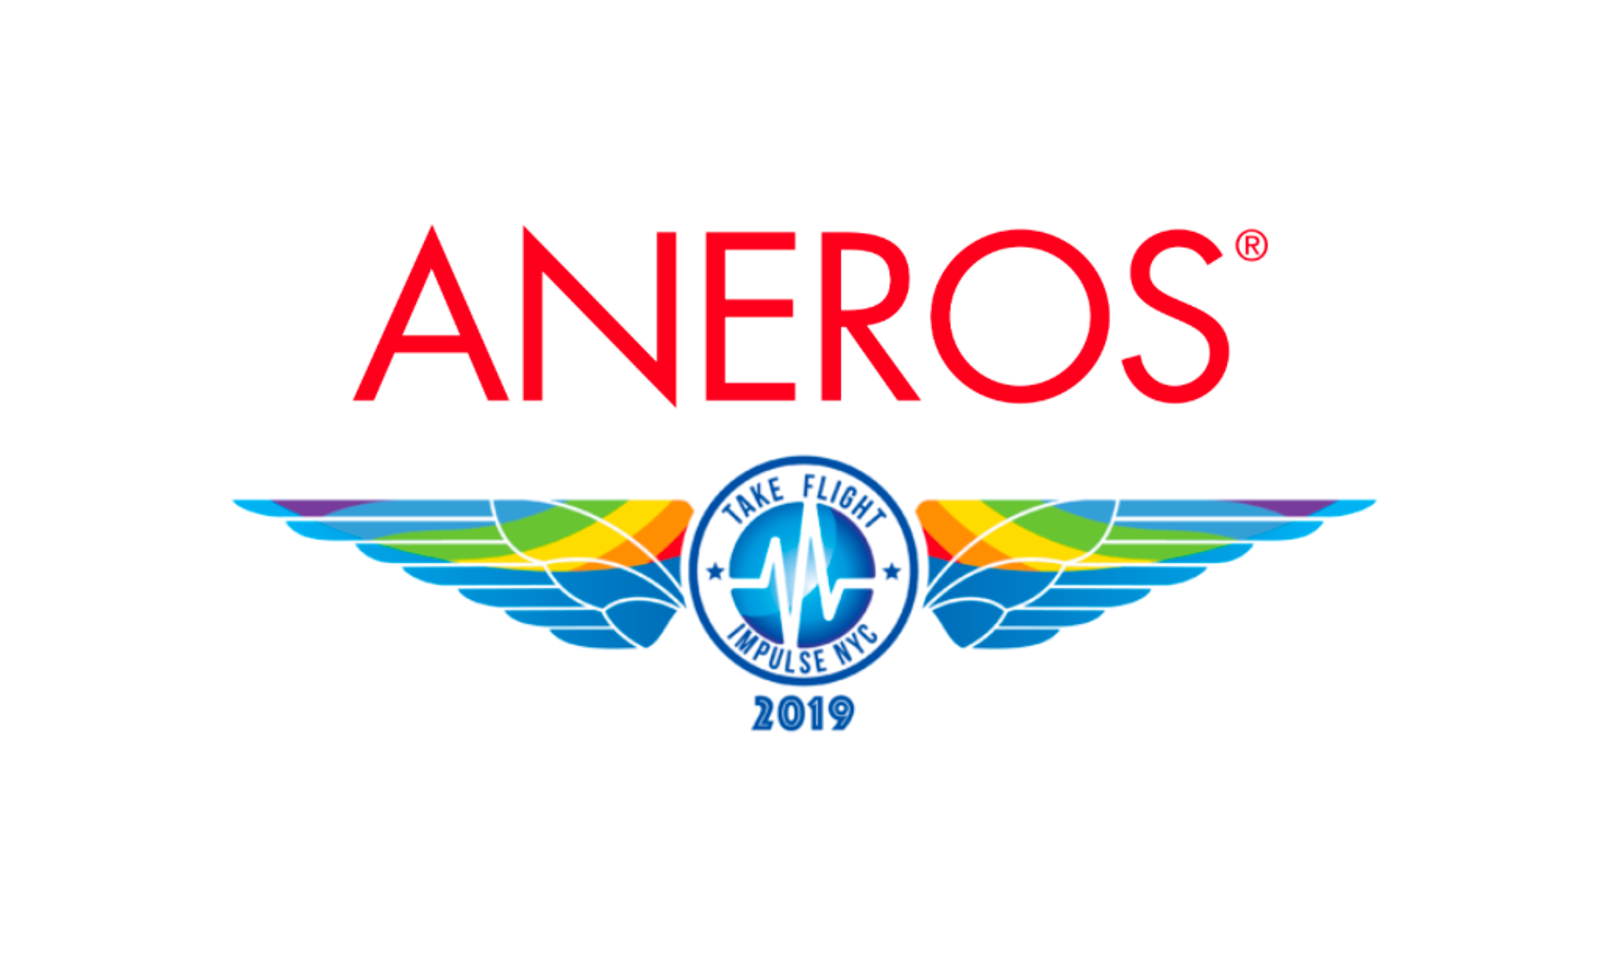 Aneros to Sponsor Impulse Group's Pride Event in NYC